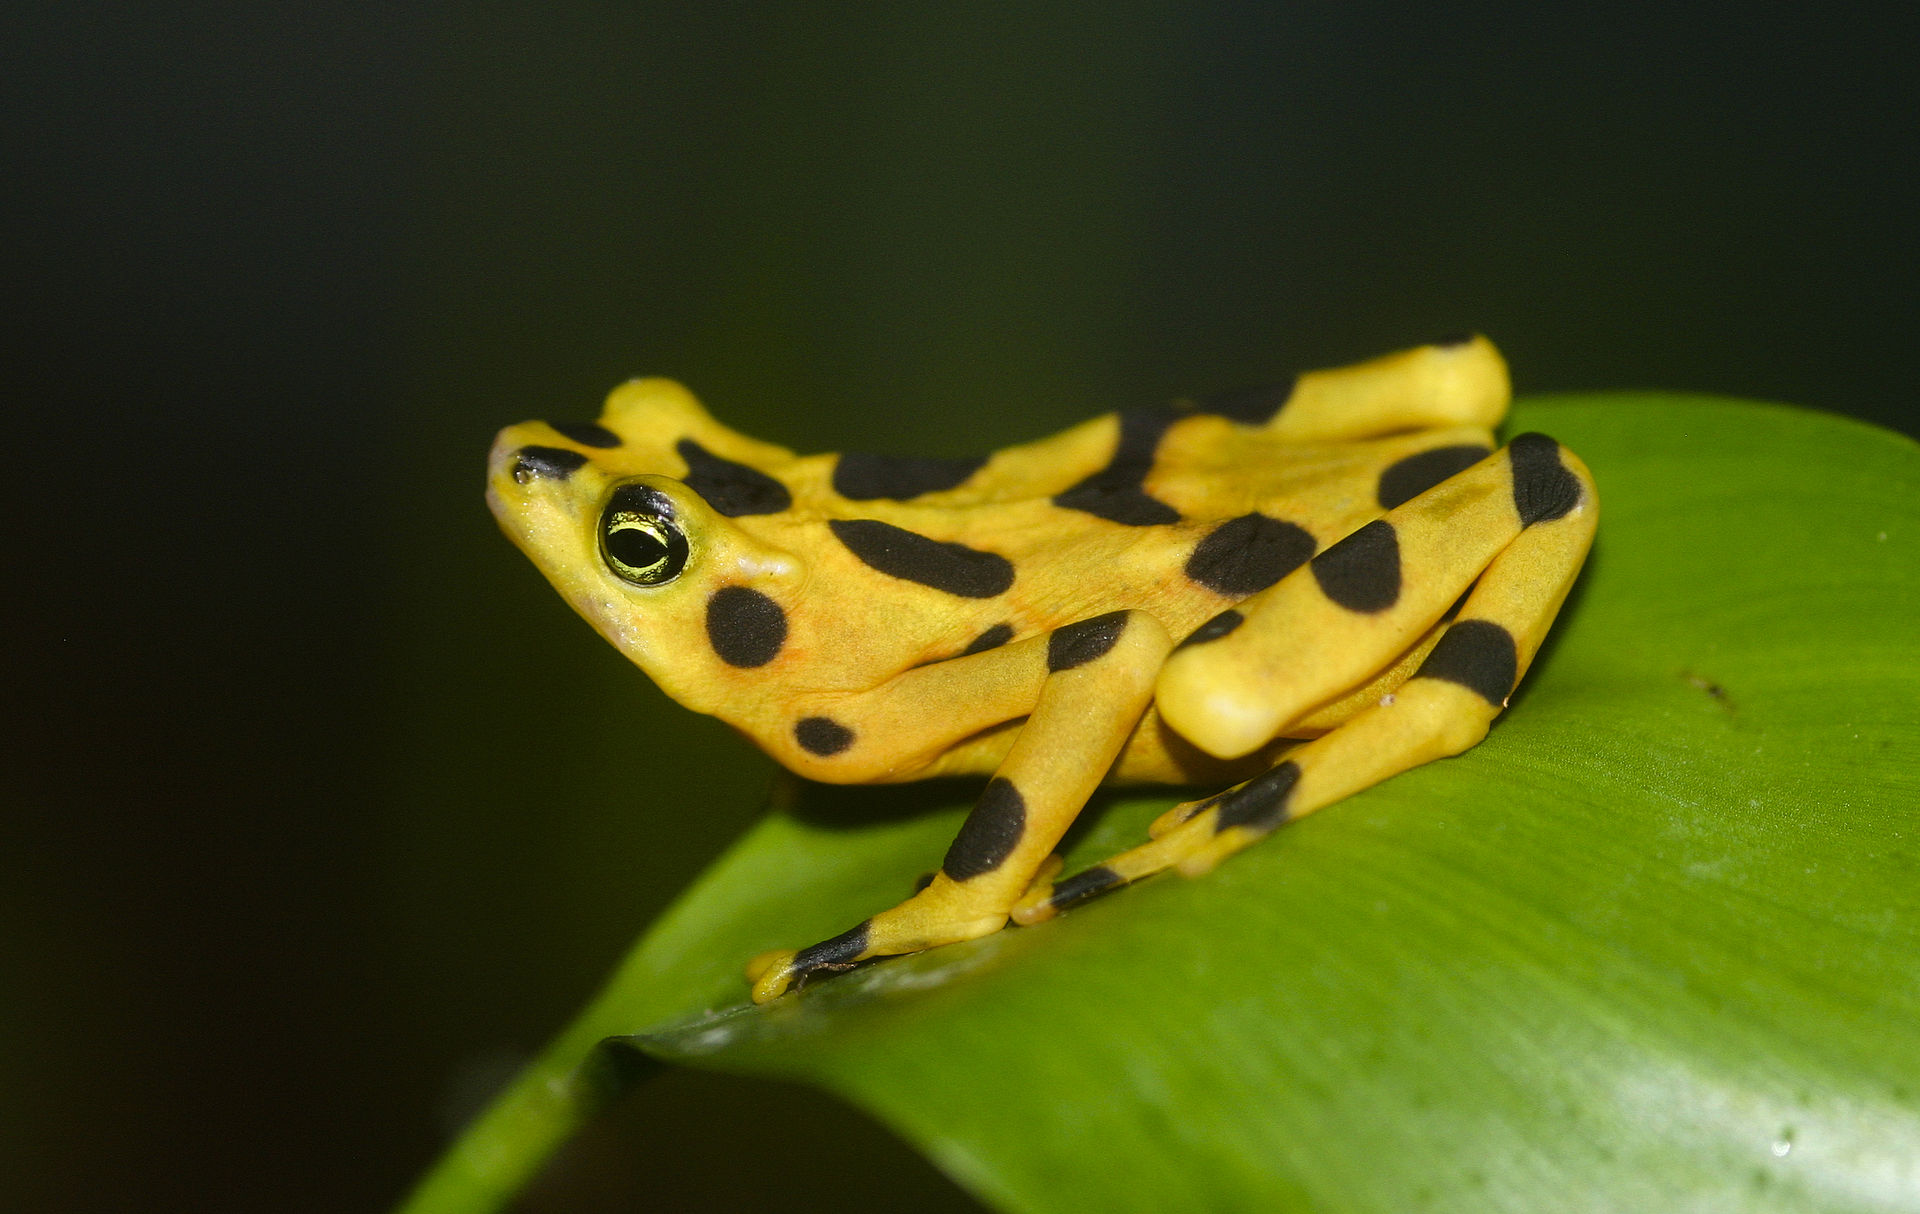 Industrial civilization forcing 41% of amphibians, 26% of mammals to extinction